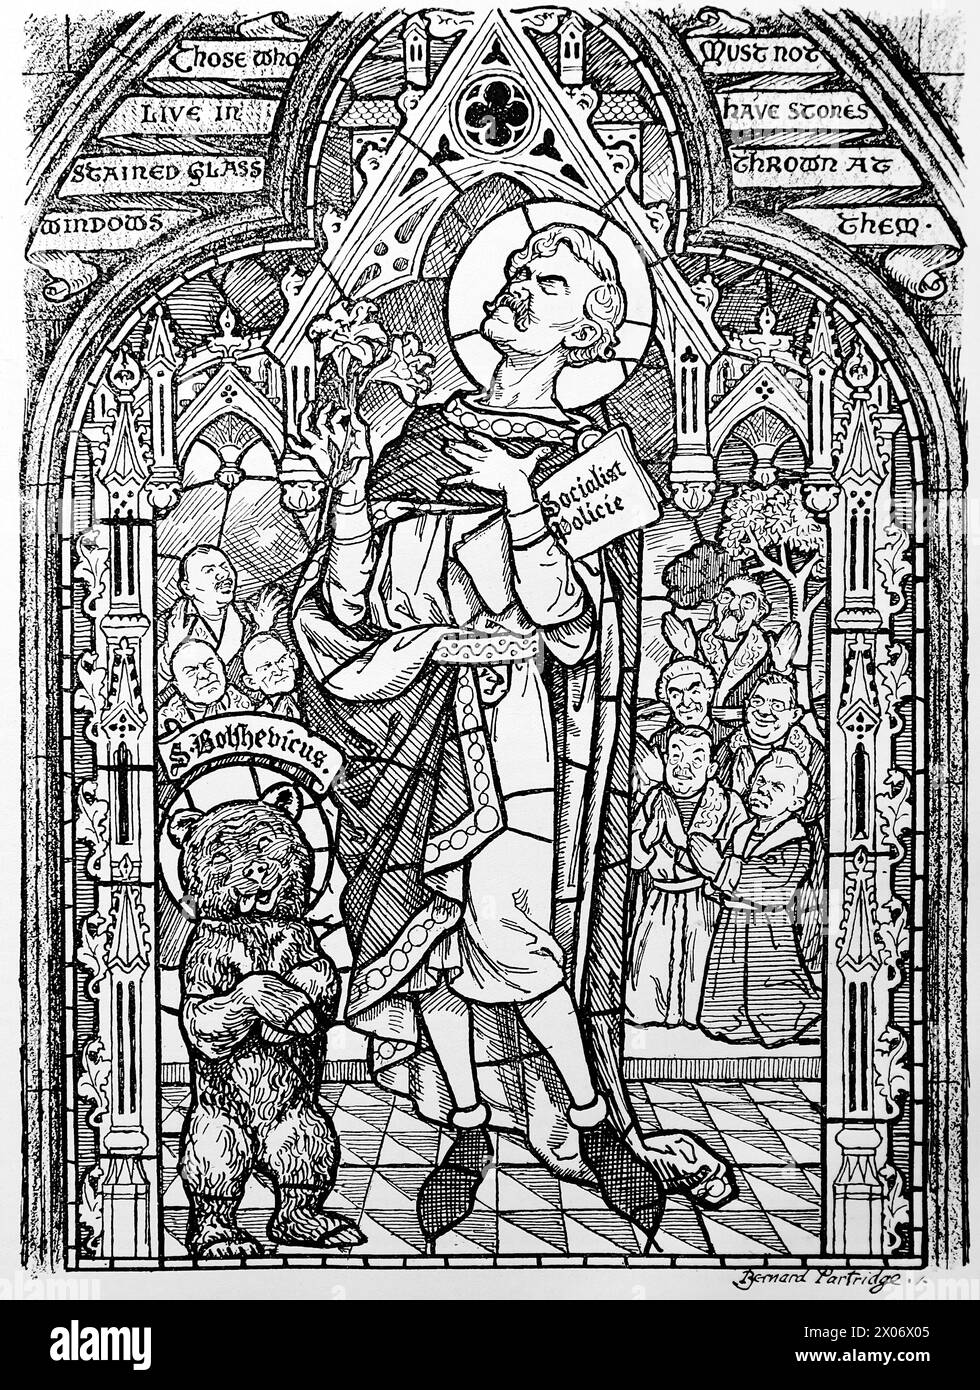 As the Premier Sees Himself by Bernard Partridge, 22 October 1924, showing Prime Minister Ramsay Macdonald in a stained glass window. Photograph from a line drawing originally printed in the Punch and London Charivari periodical in 1924. This is a good example of the skilful artists and the humour and satire of the time. Stock Photo